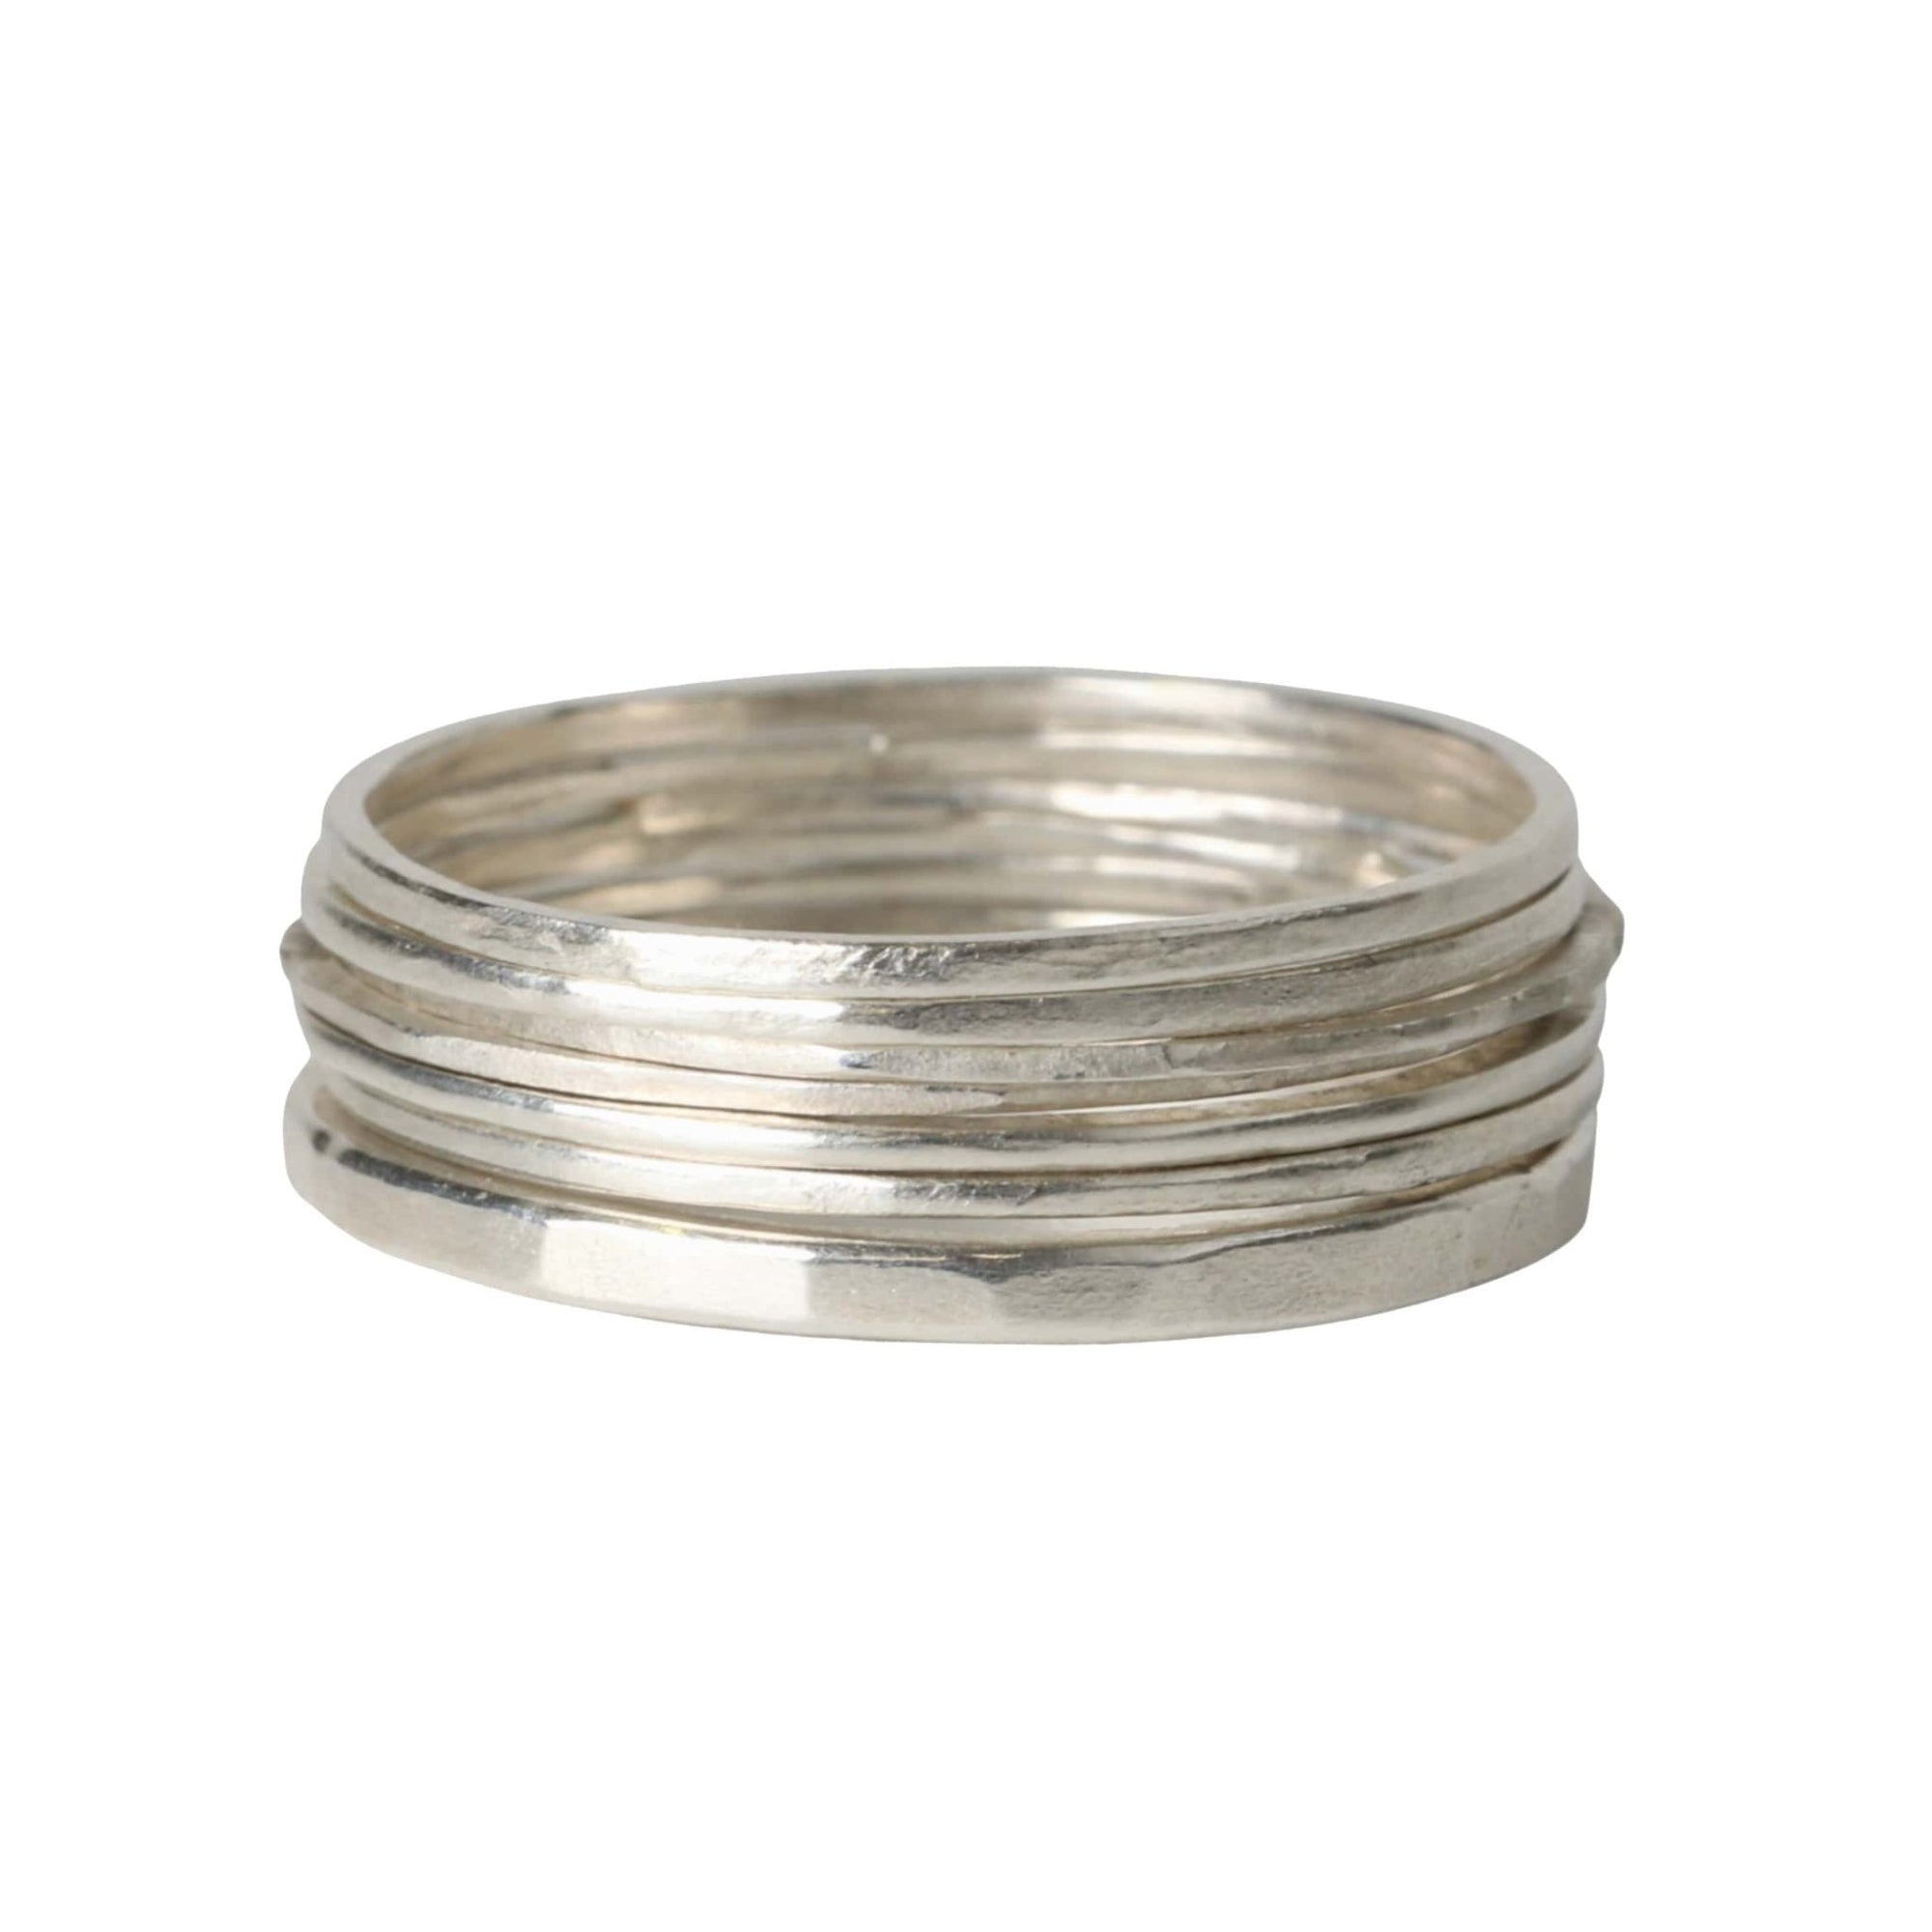 Sarah Macfadden Set of 7 Sterling Silver Hammered Stacking Bands with Varying Thicknesses